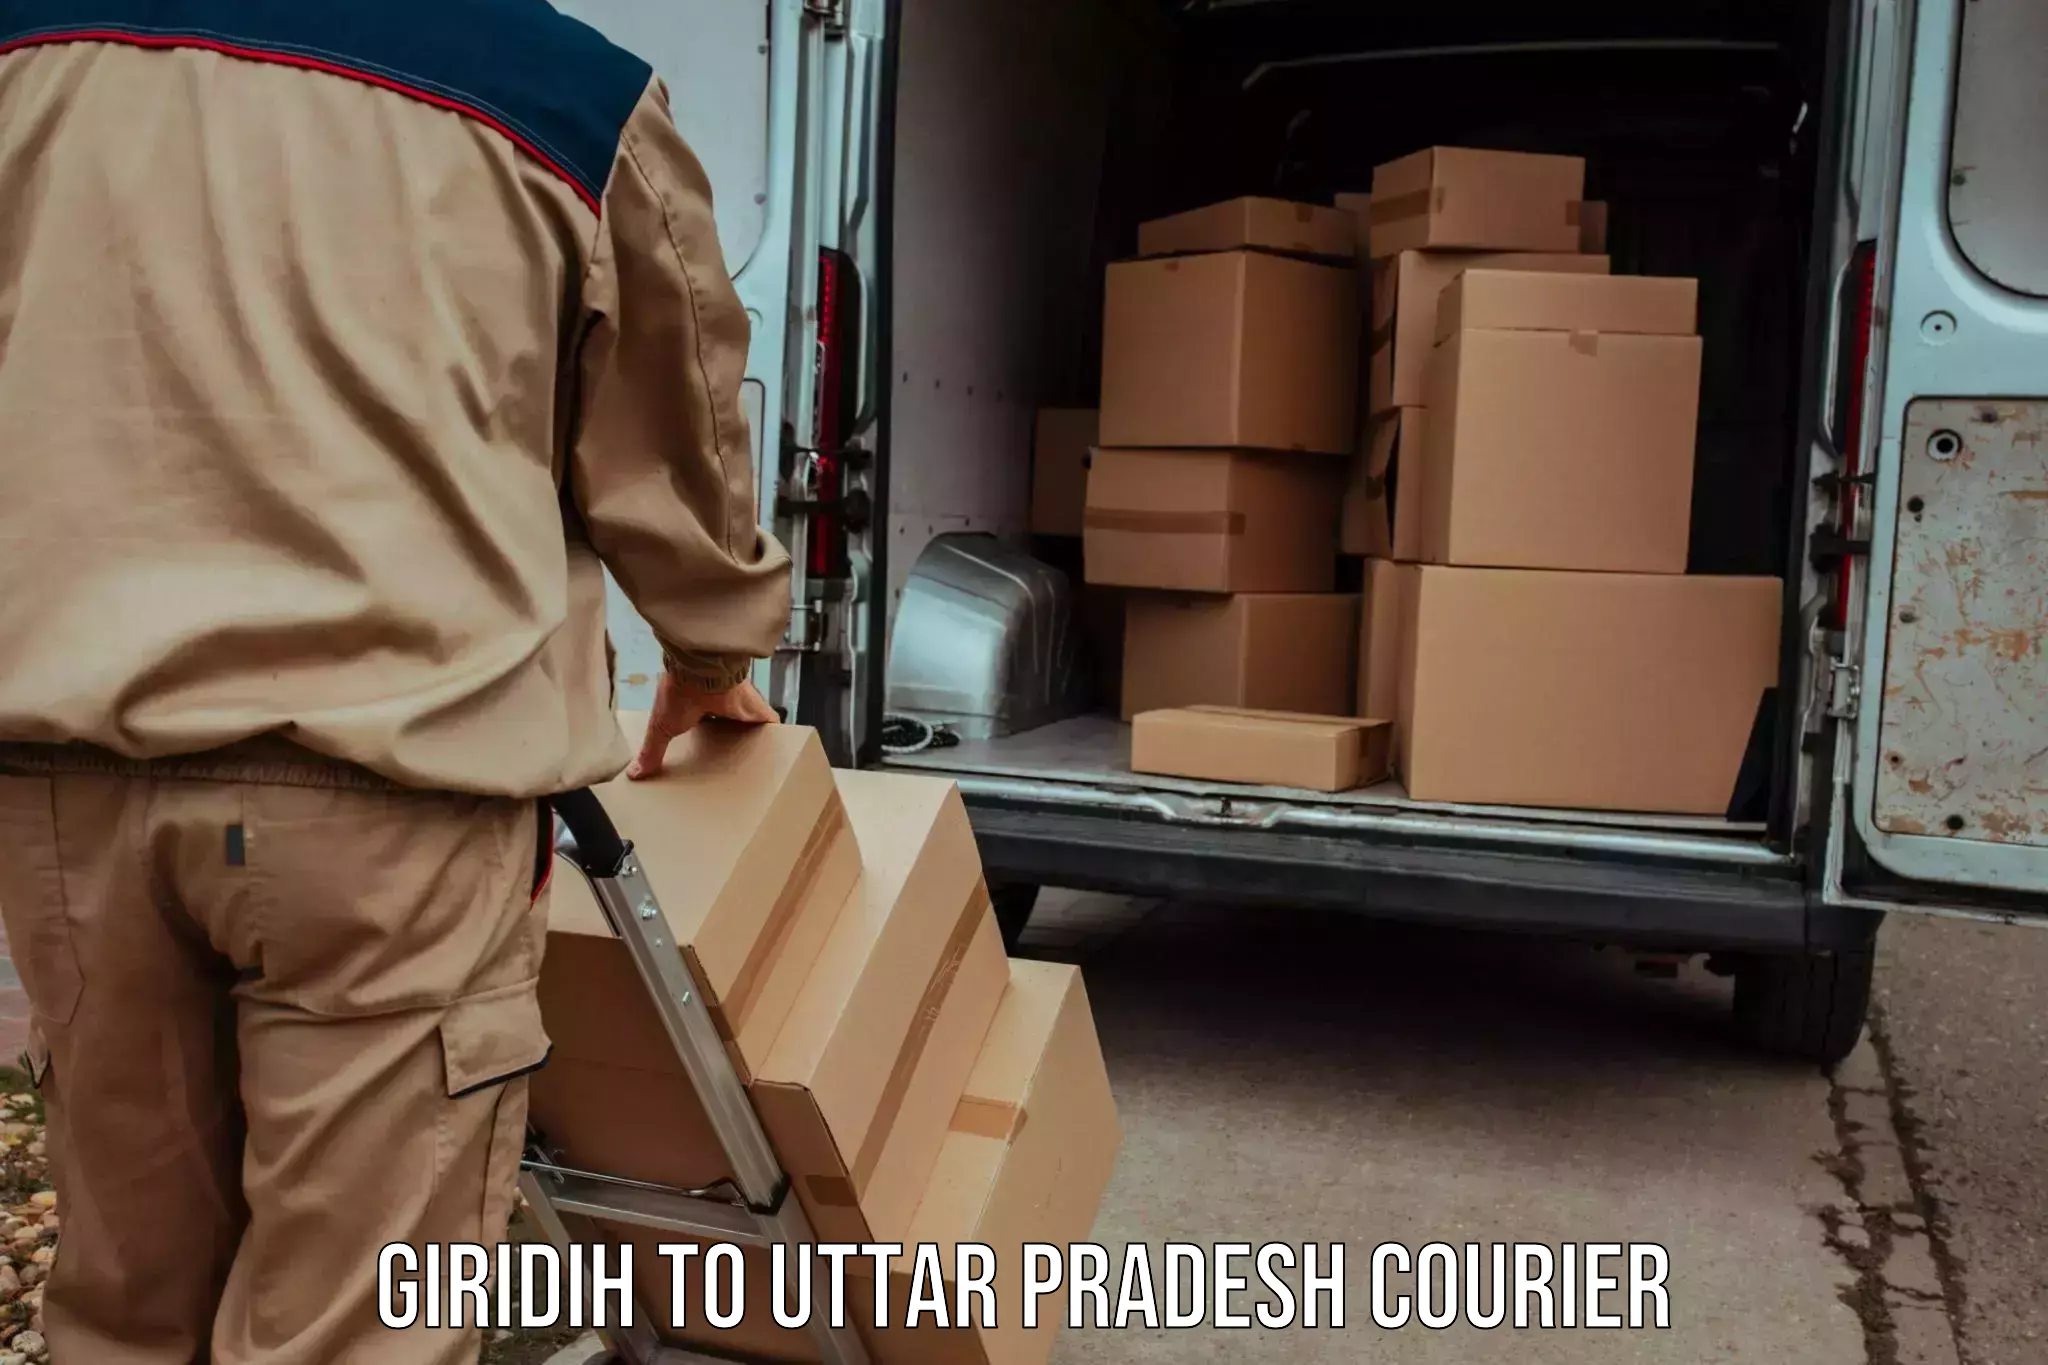 Multi-service courier options Giridih to Allahabad